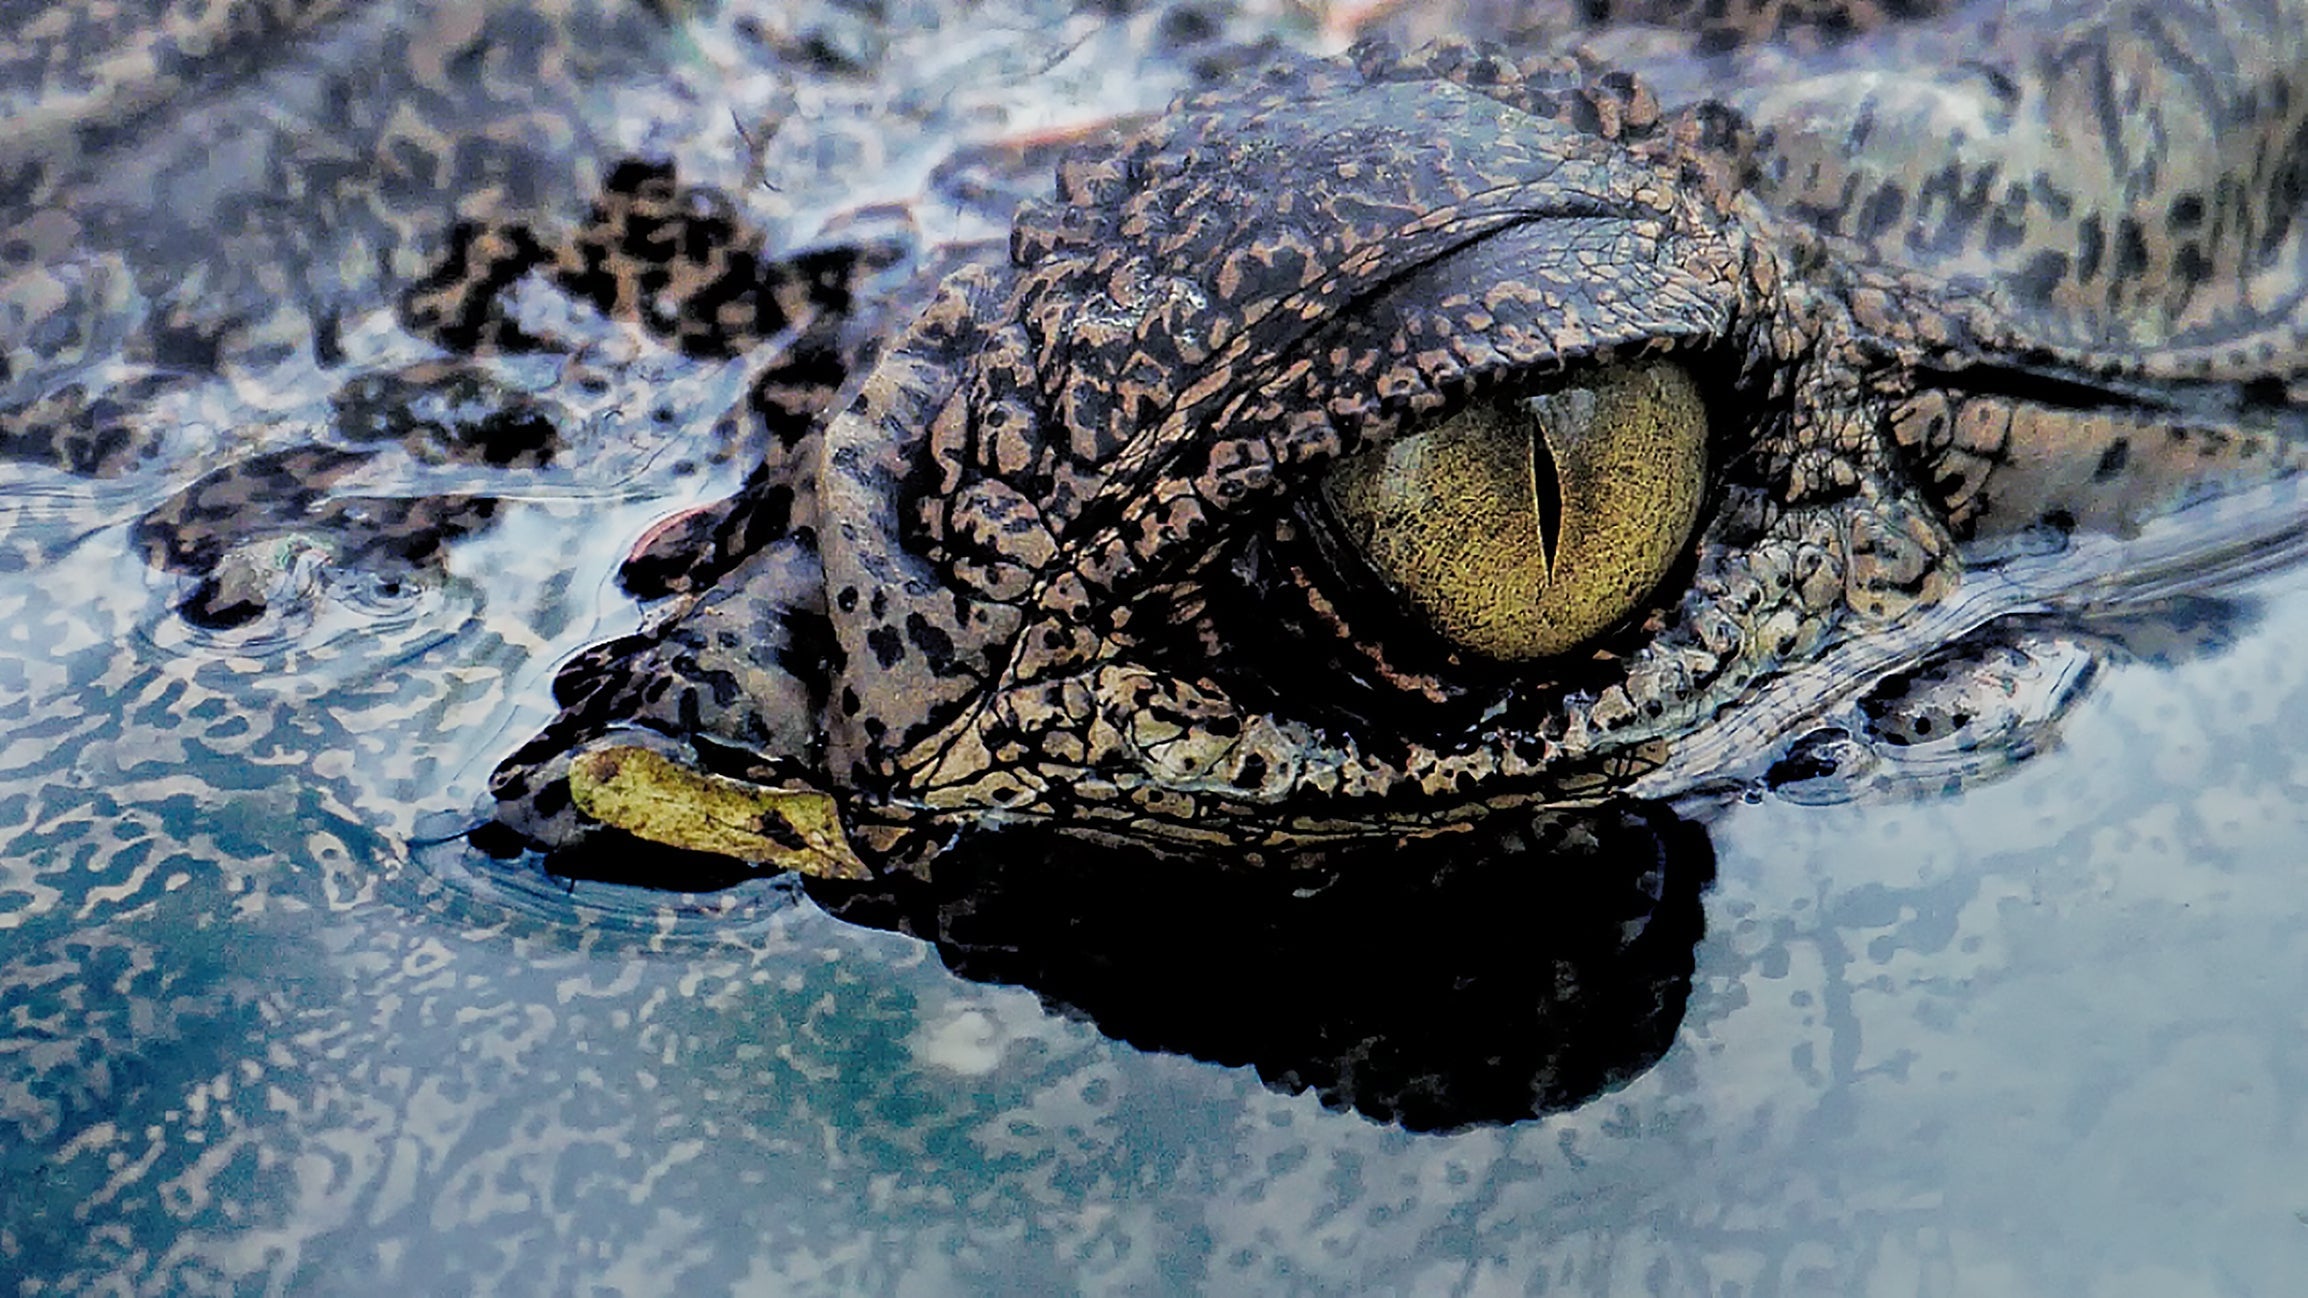 Caimans can go for about two hours without blinking